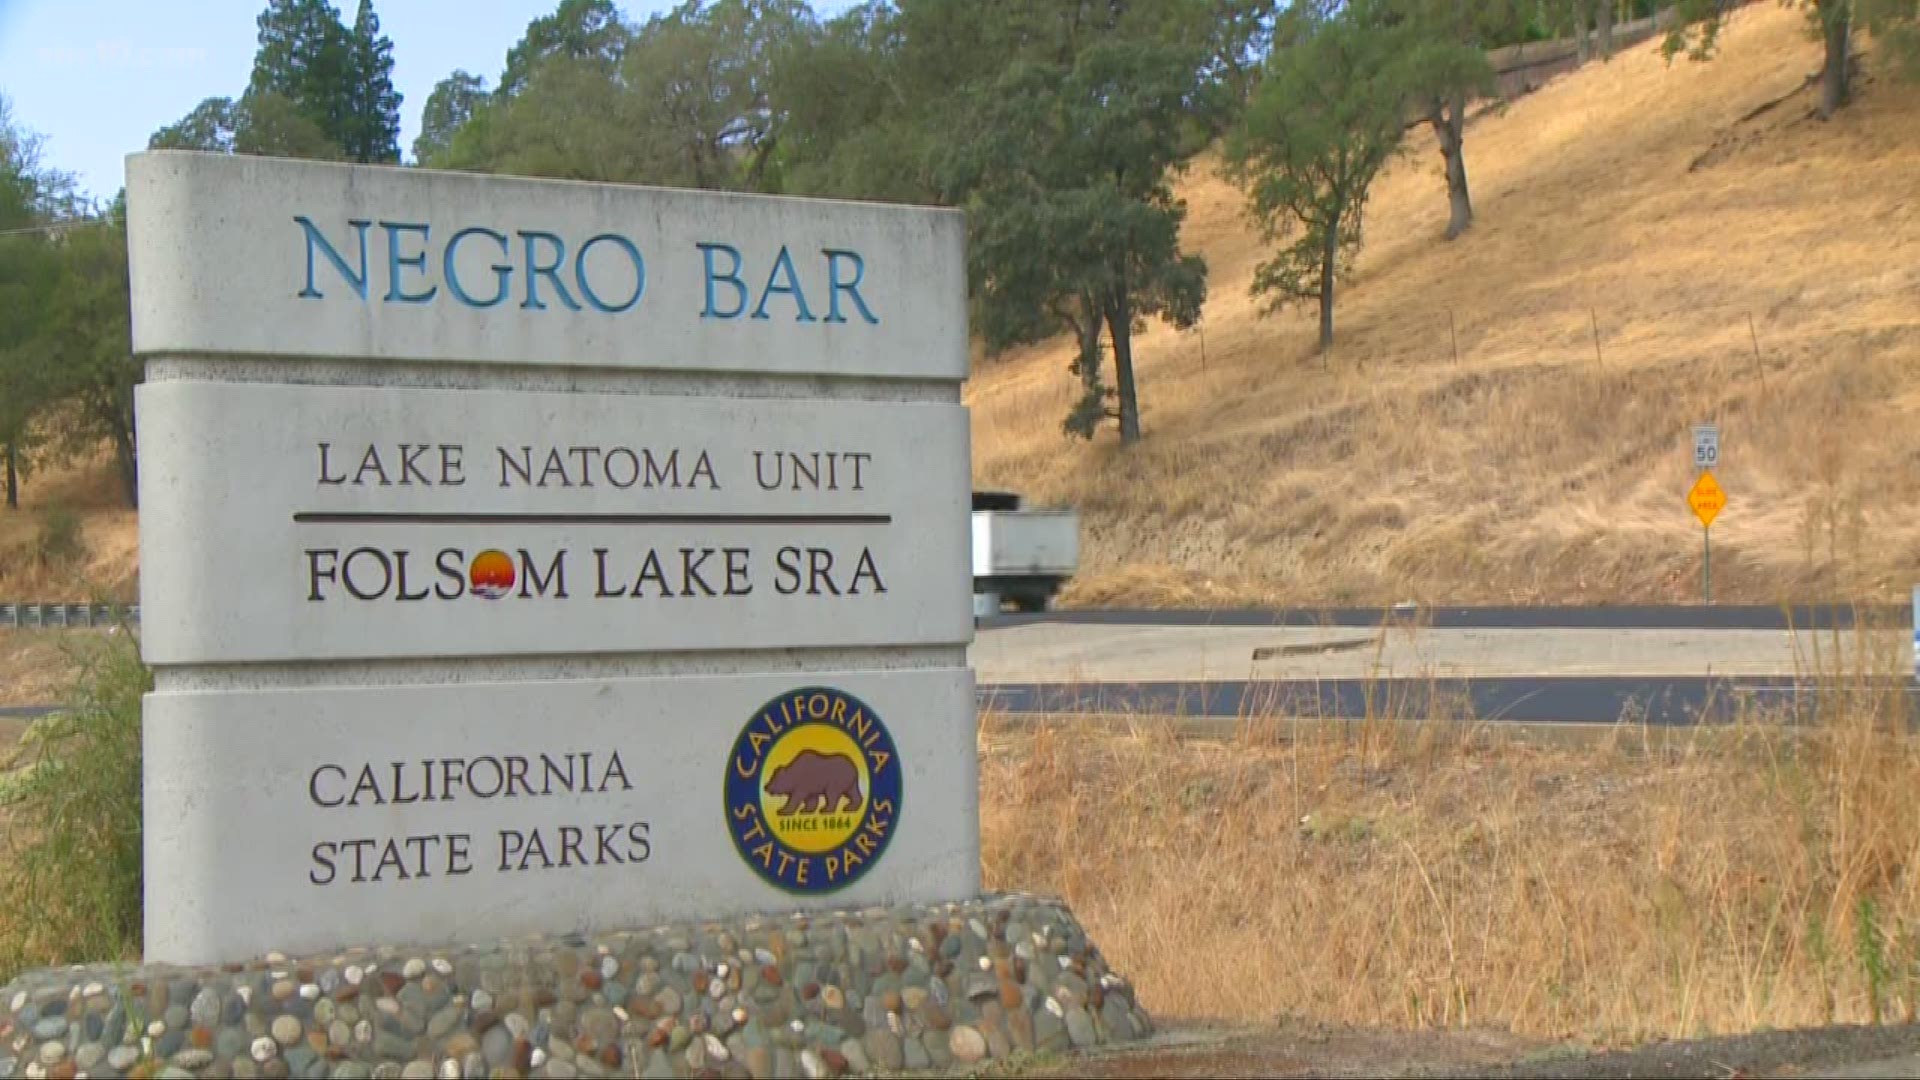 Phaedra Jones of Stockton started a petition to rename the Negro Bar State Park in Folsom, because she thinks it's racist and offensive.